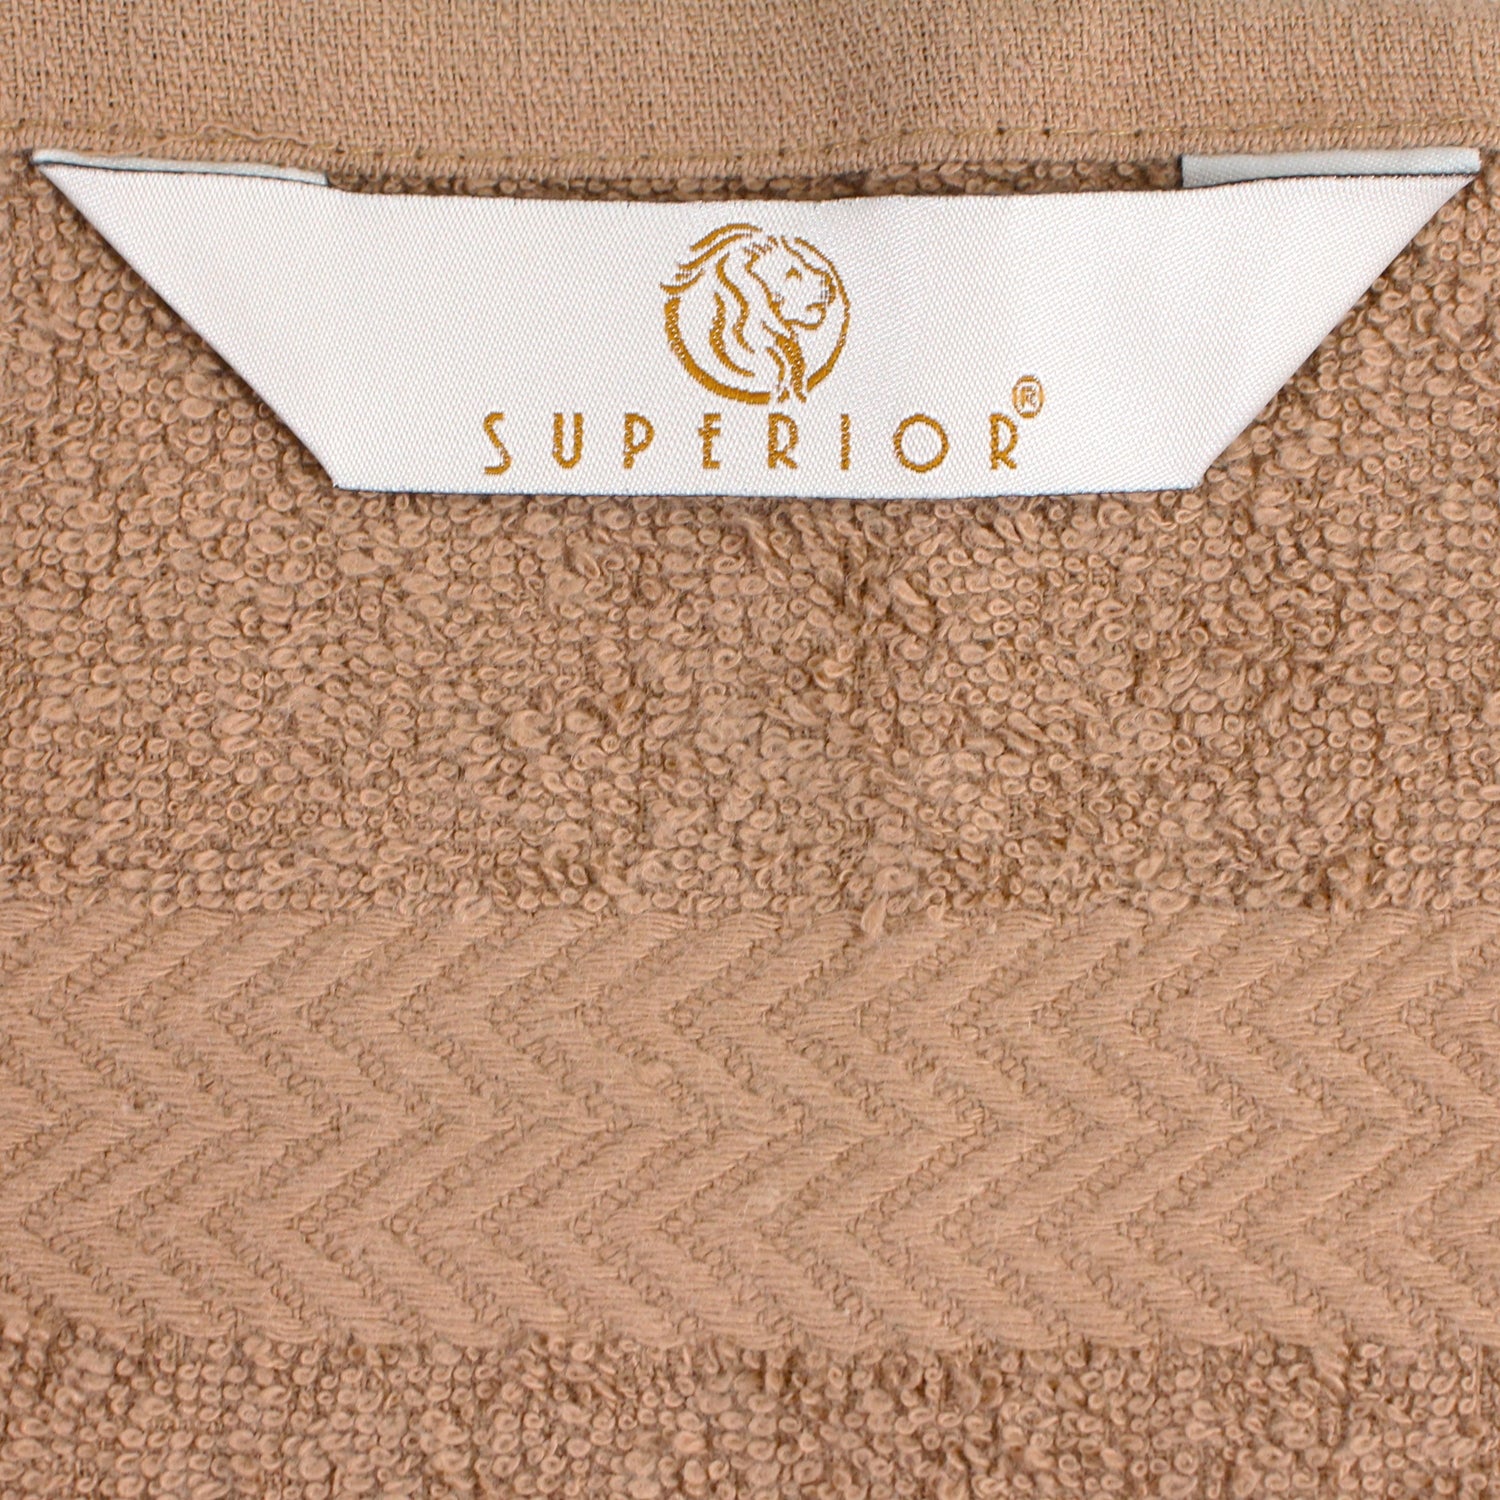 Superior Cotton 4-Piece Bath Towels Set Highly Absorbent Eco-Friendly Quick Dry - Latte